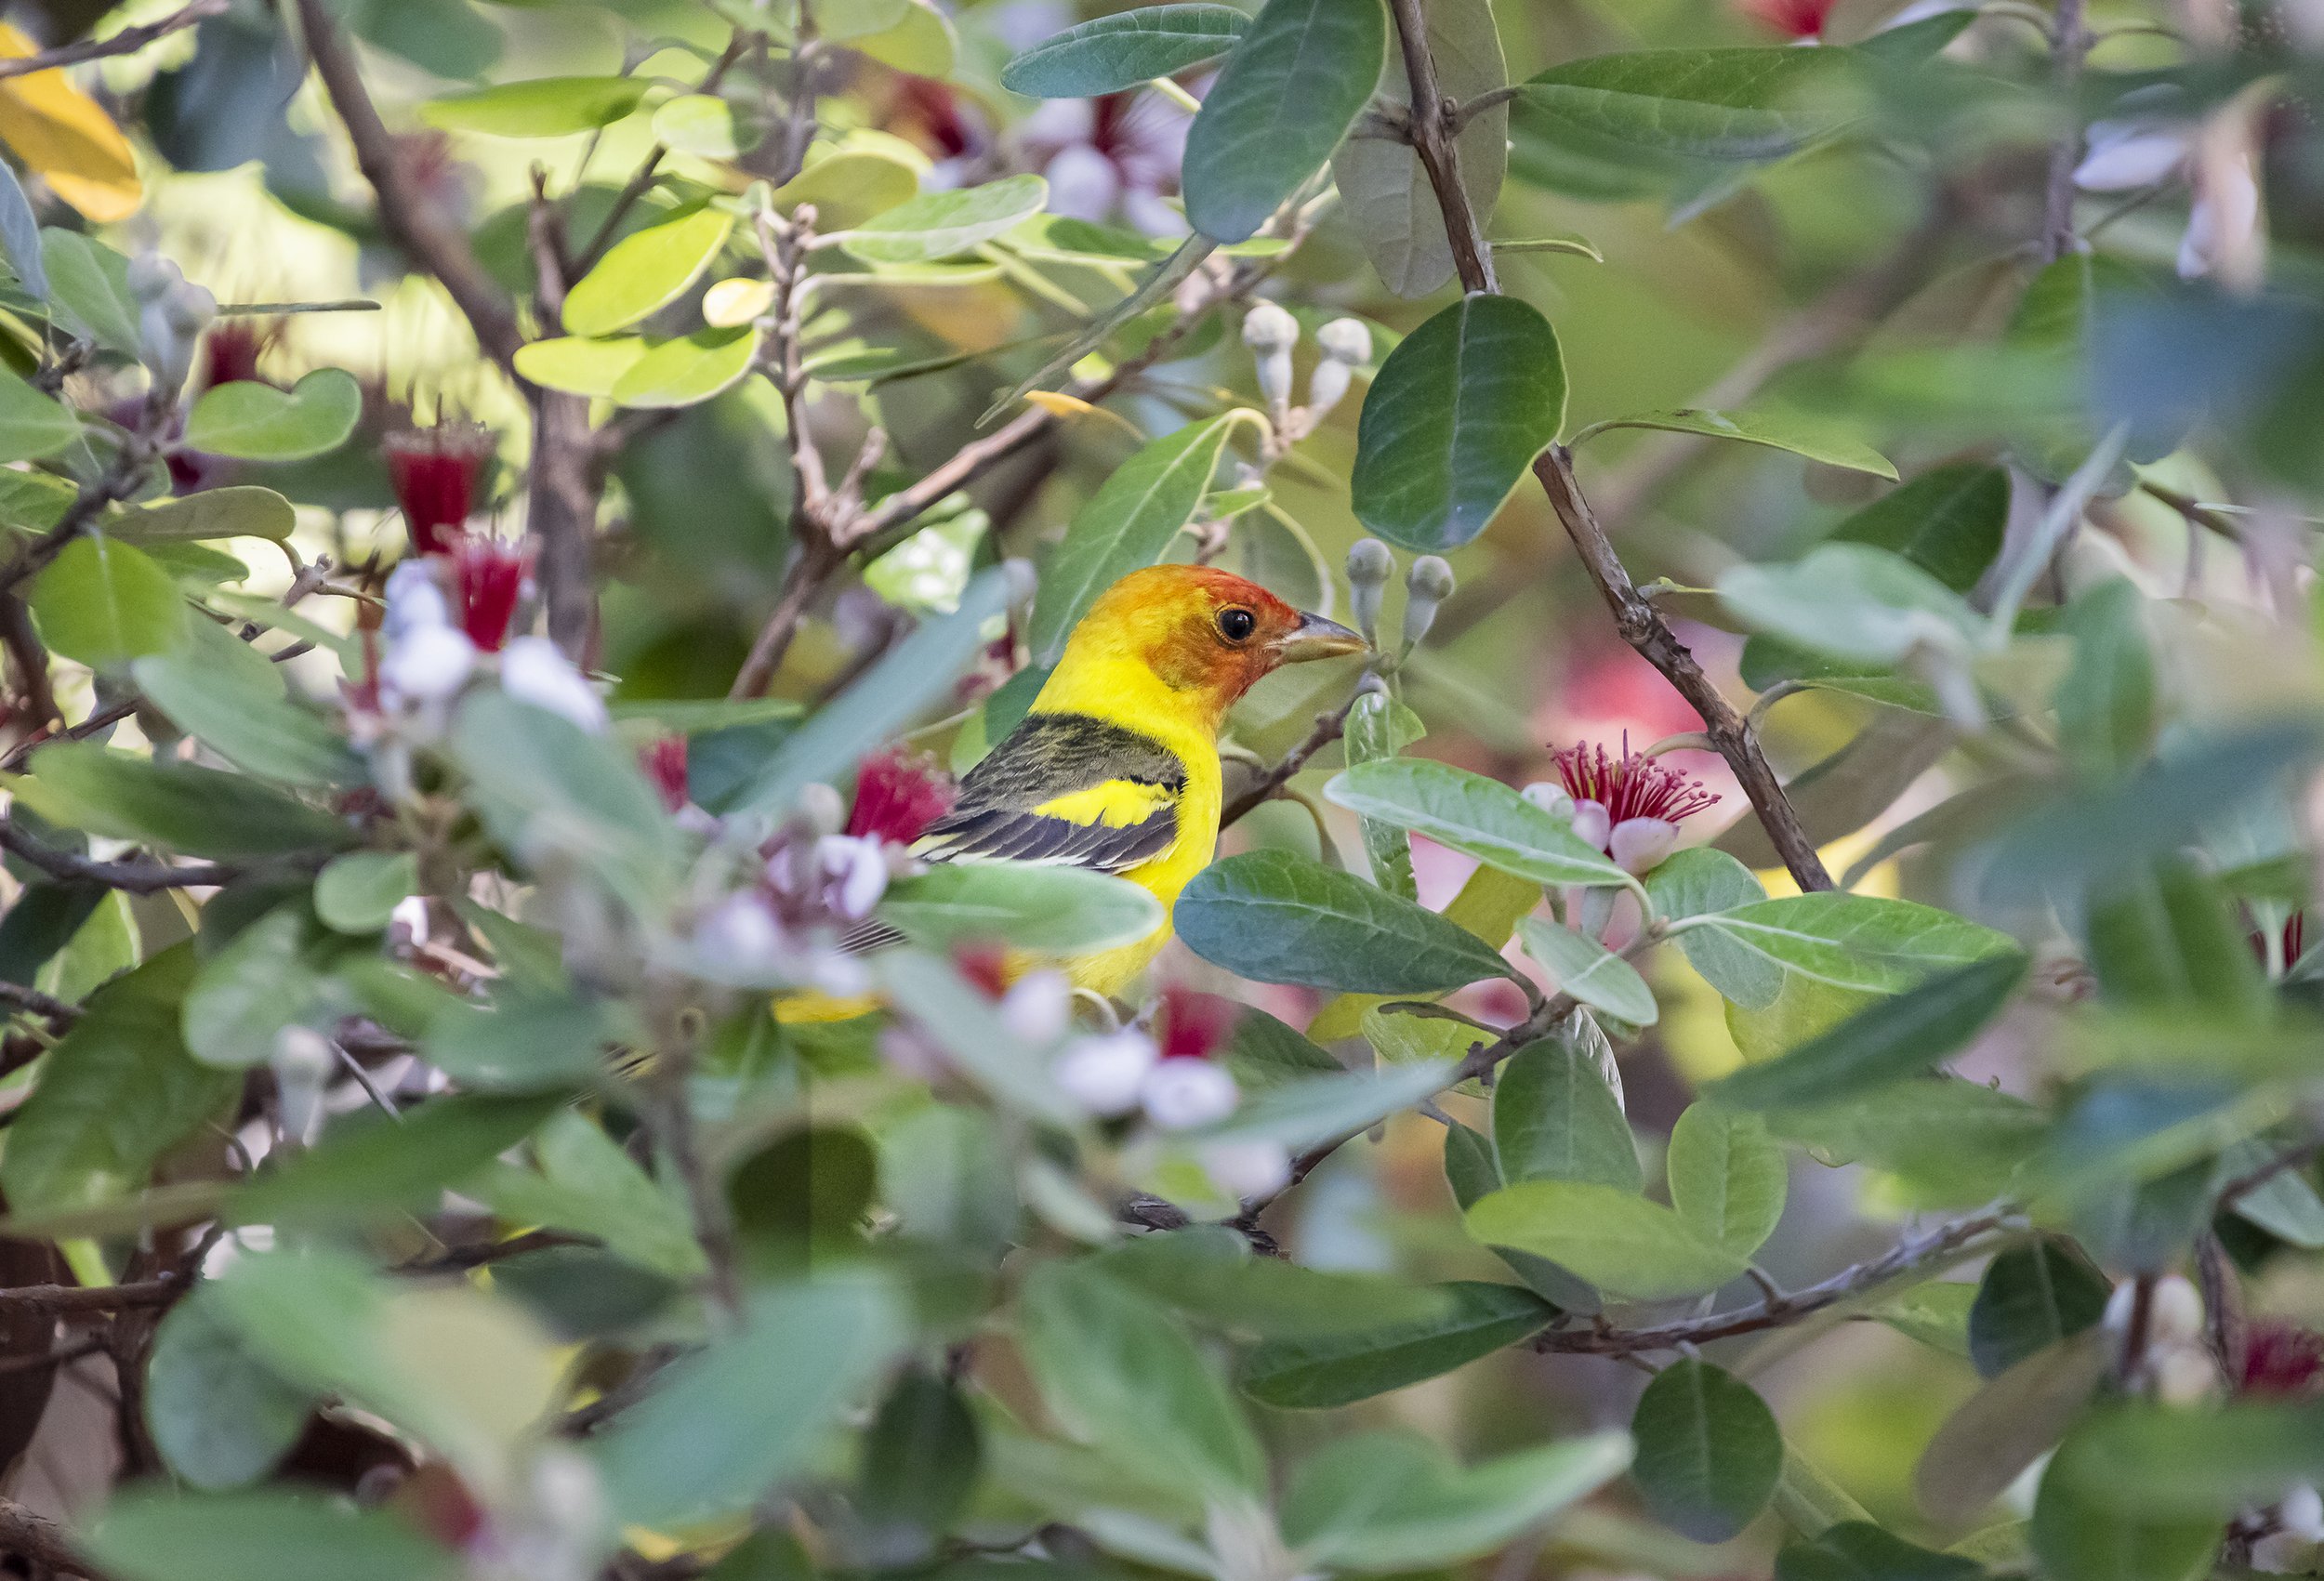 Western Tanager(male) eating Guava Flowers, San Jose, California